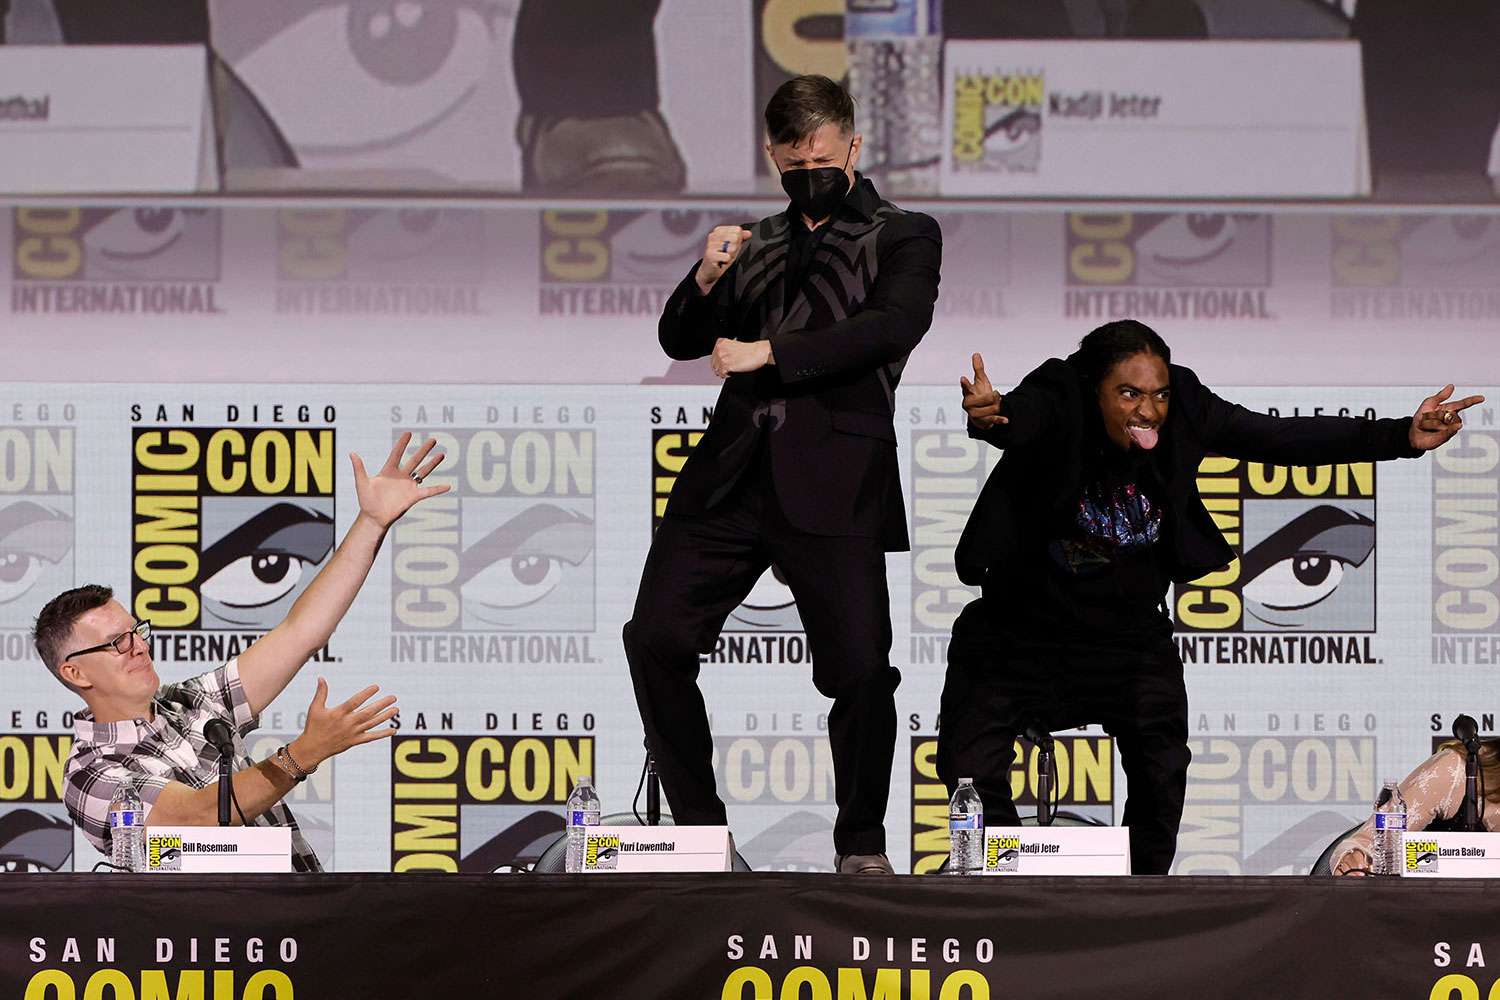 Bill Rosemann, Yuri Lowenthal and Nadji Jeter onstage at Marvel's Spider-Man 2: Symbiotic Relationships panel during 2023 Comic-Con International in San Diego